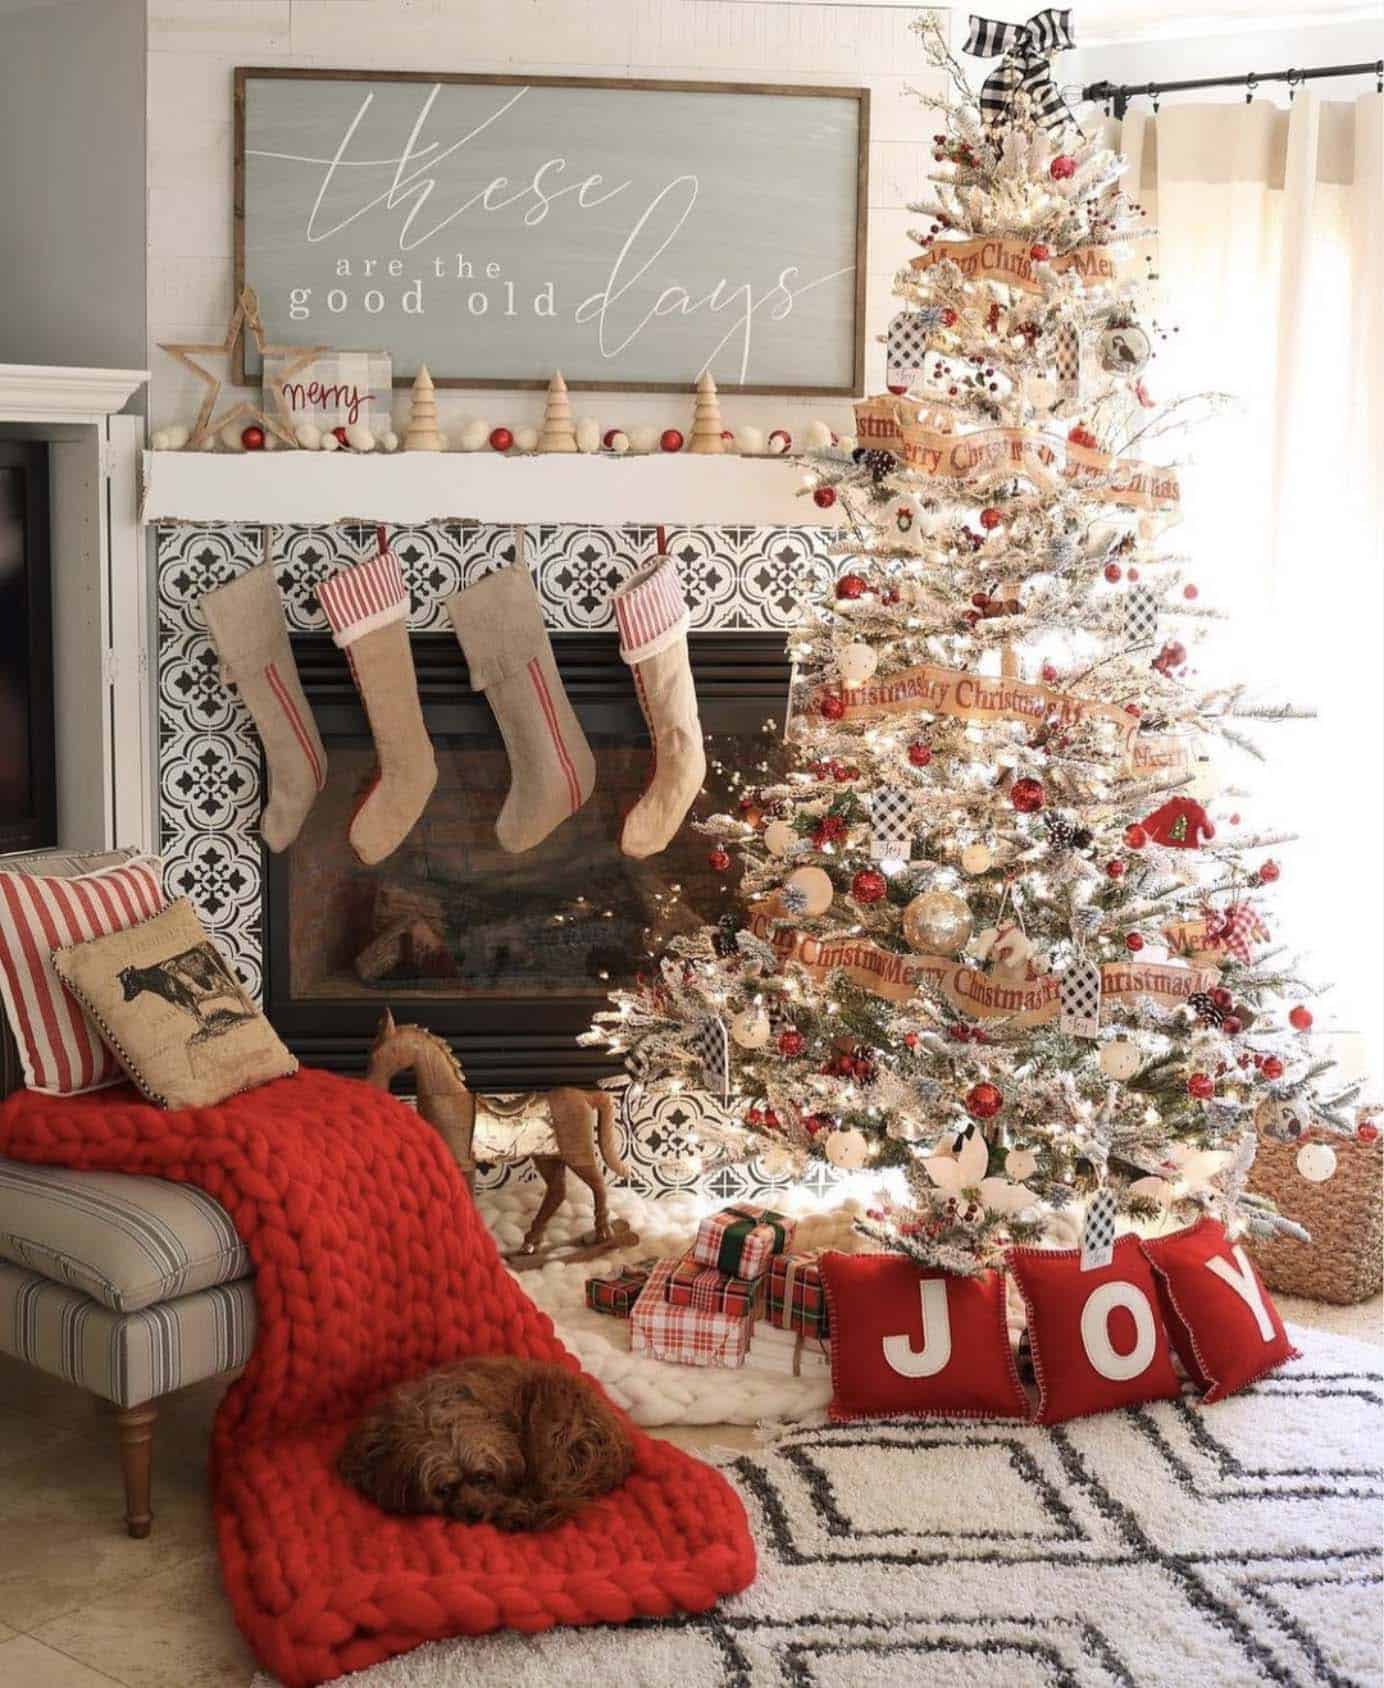 fireplace accented with a flocked tree, JOY pillows, and a chunky red blanket